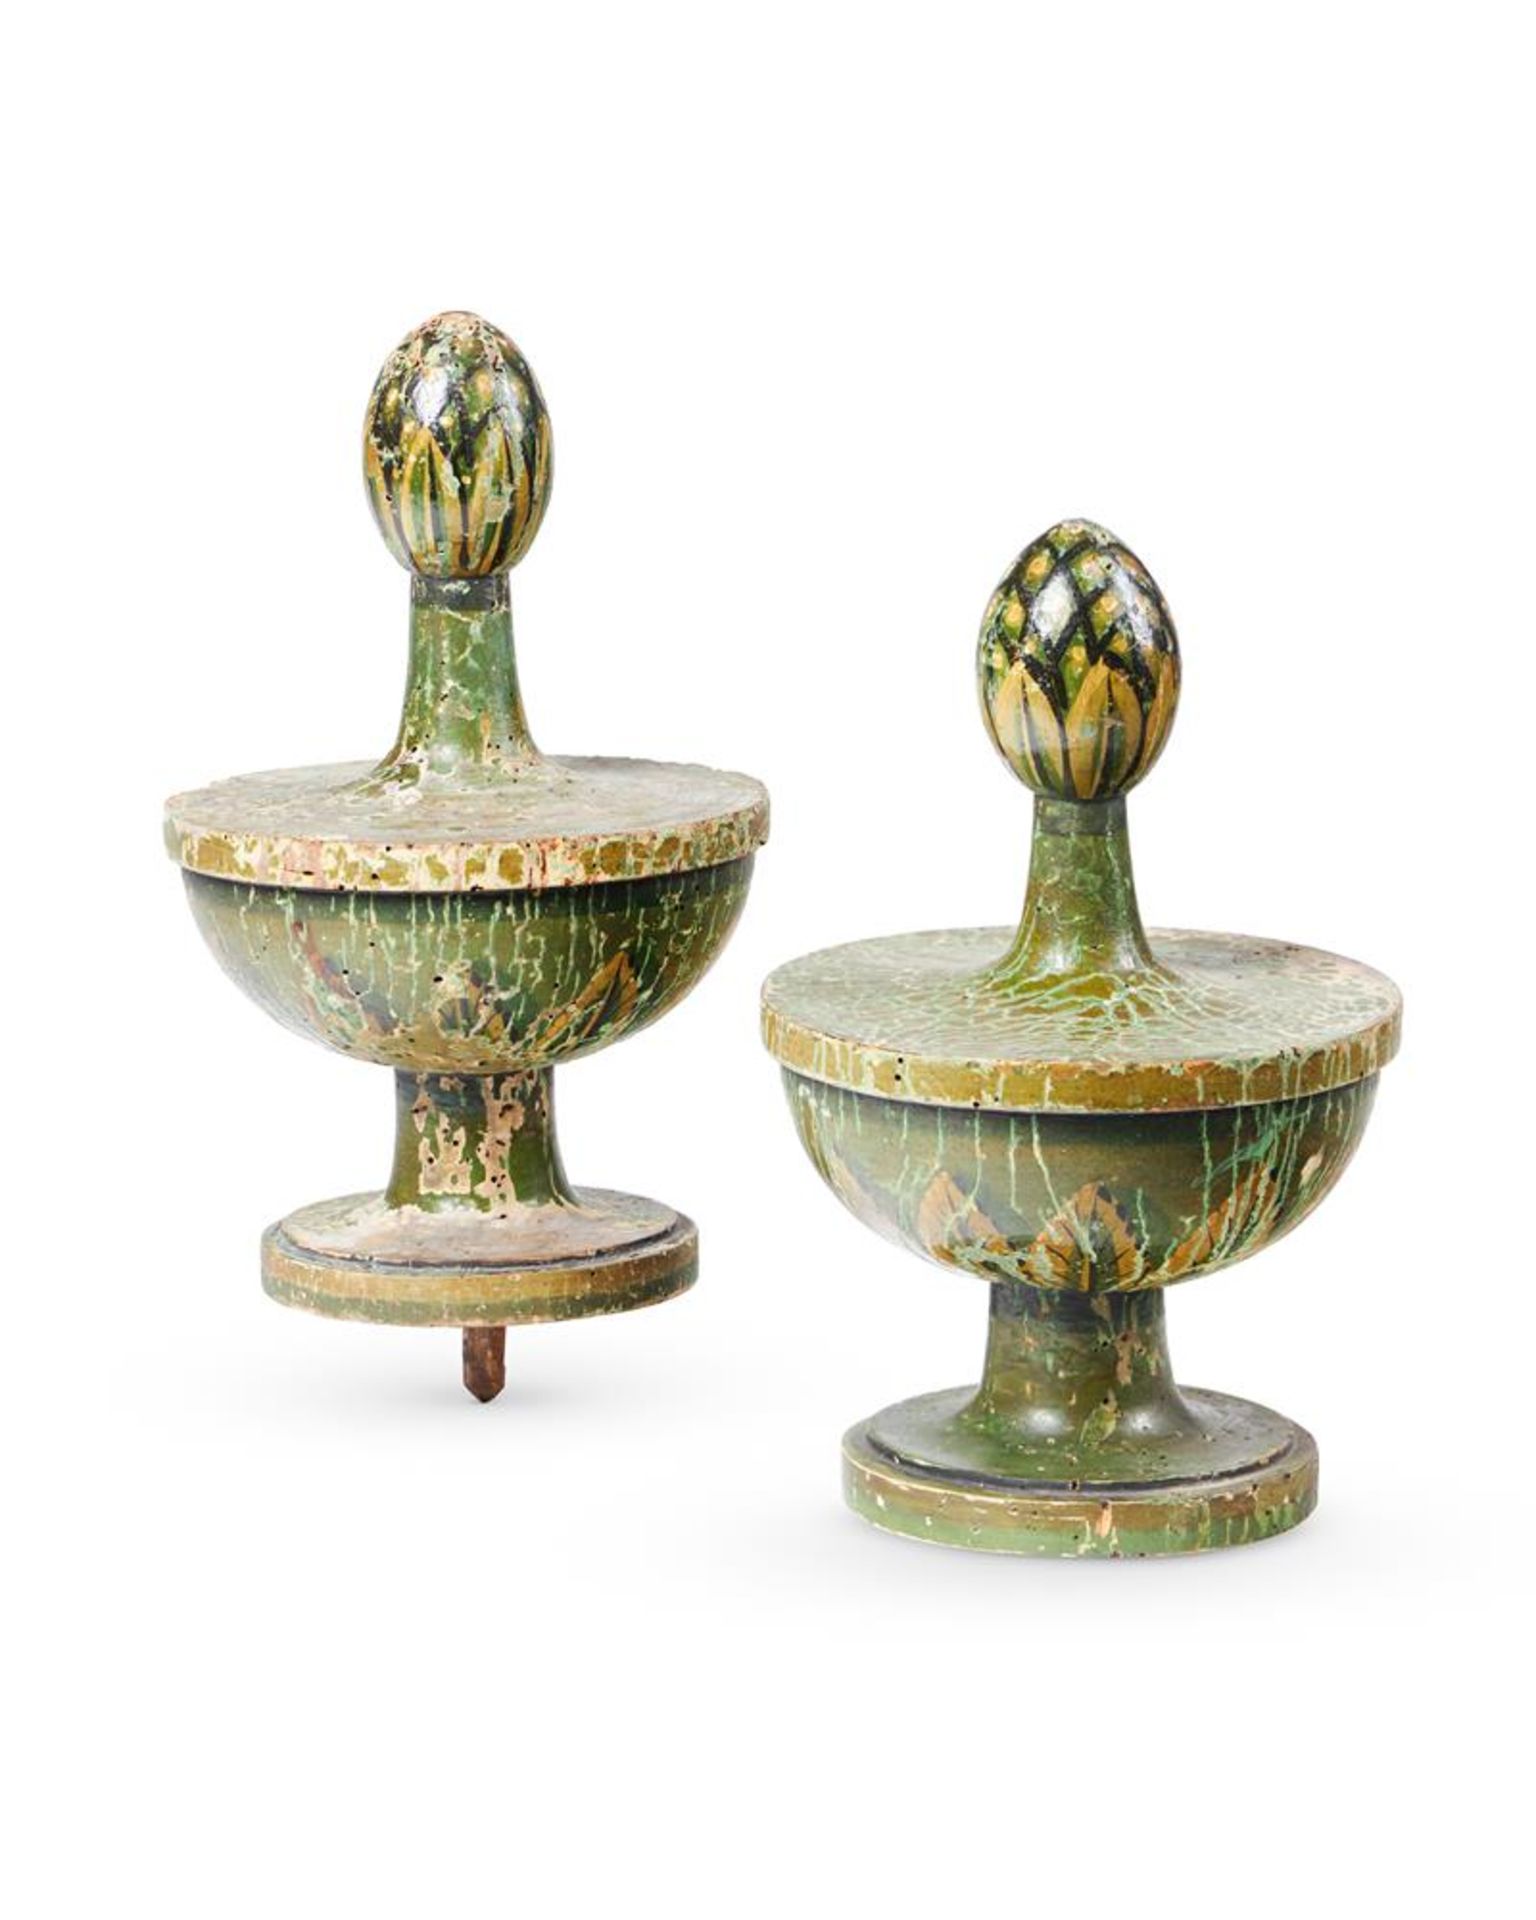 A PAIR OF GEORGE III TURNED AND FLORAL PAINTED WOOD FINIALS, CIRCA 1770